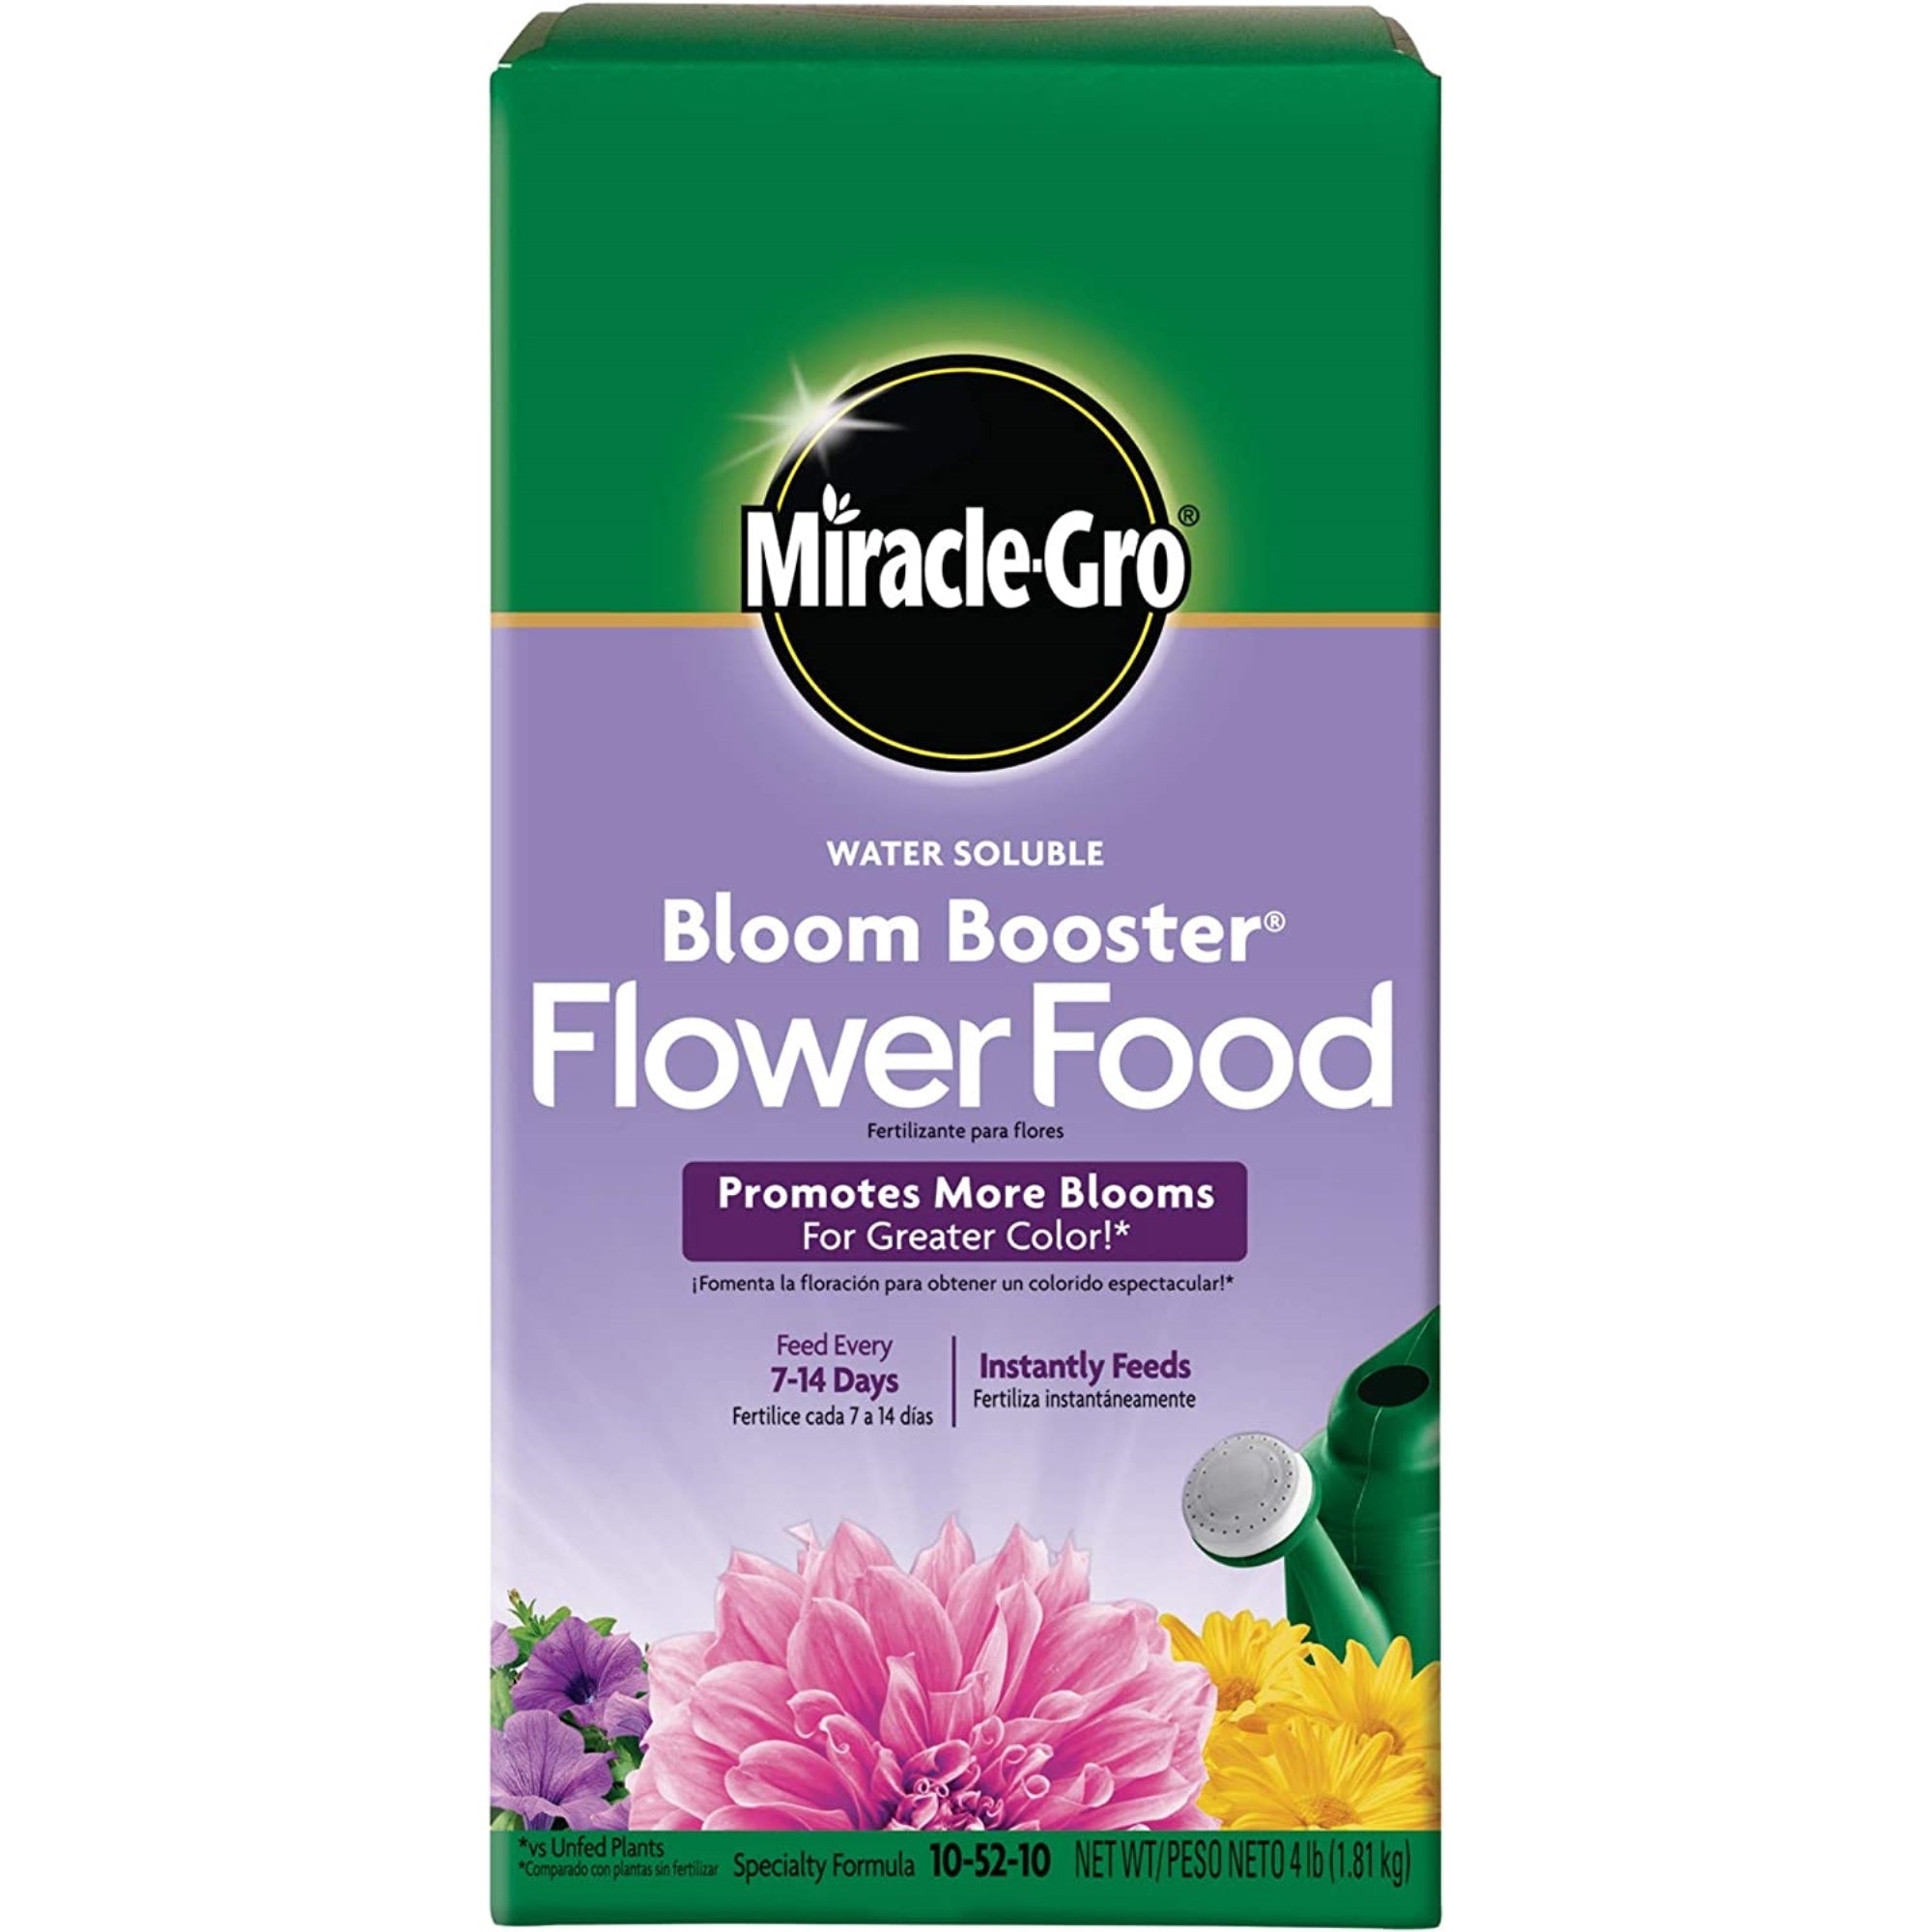 Miracle-Gro Water Soluble Bloom Booster Flower Food, 10-52-10, 4 Pound